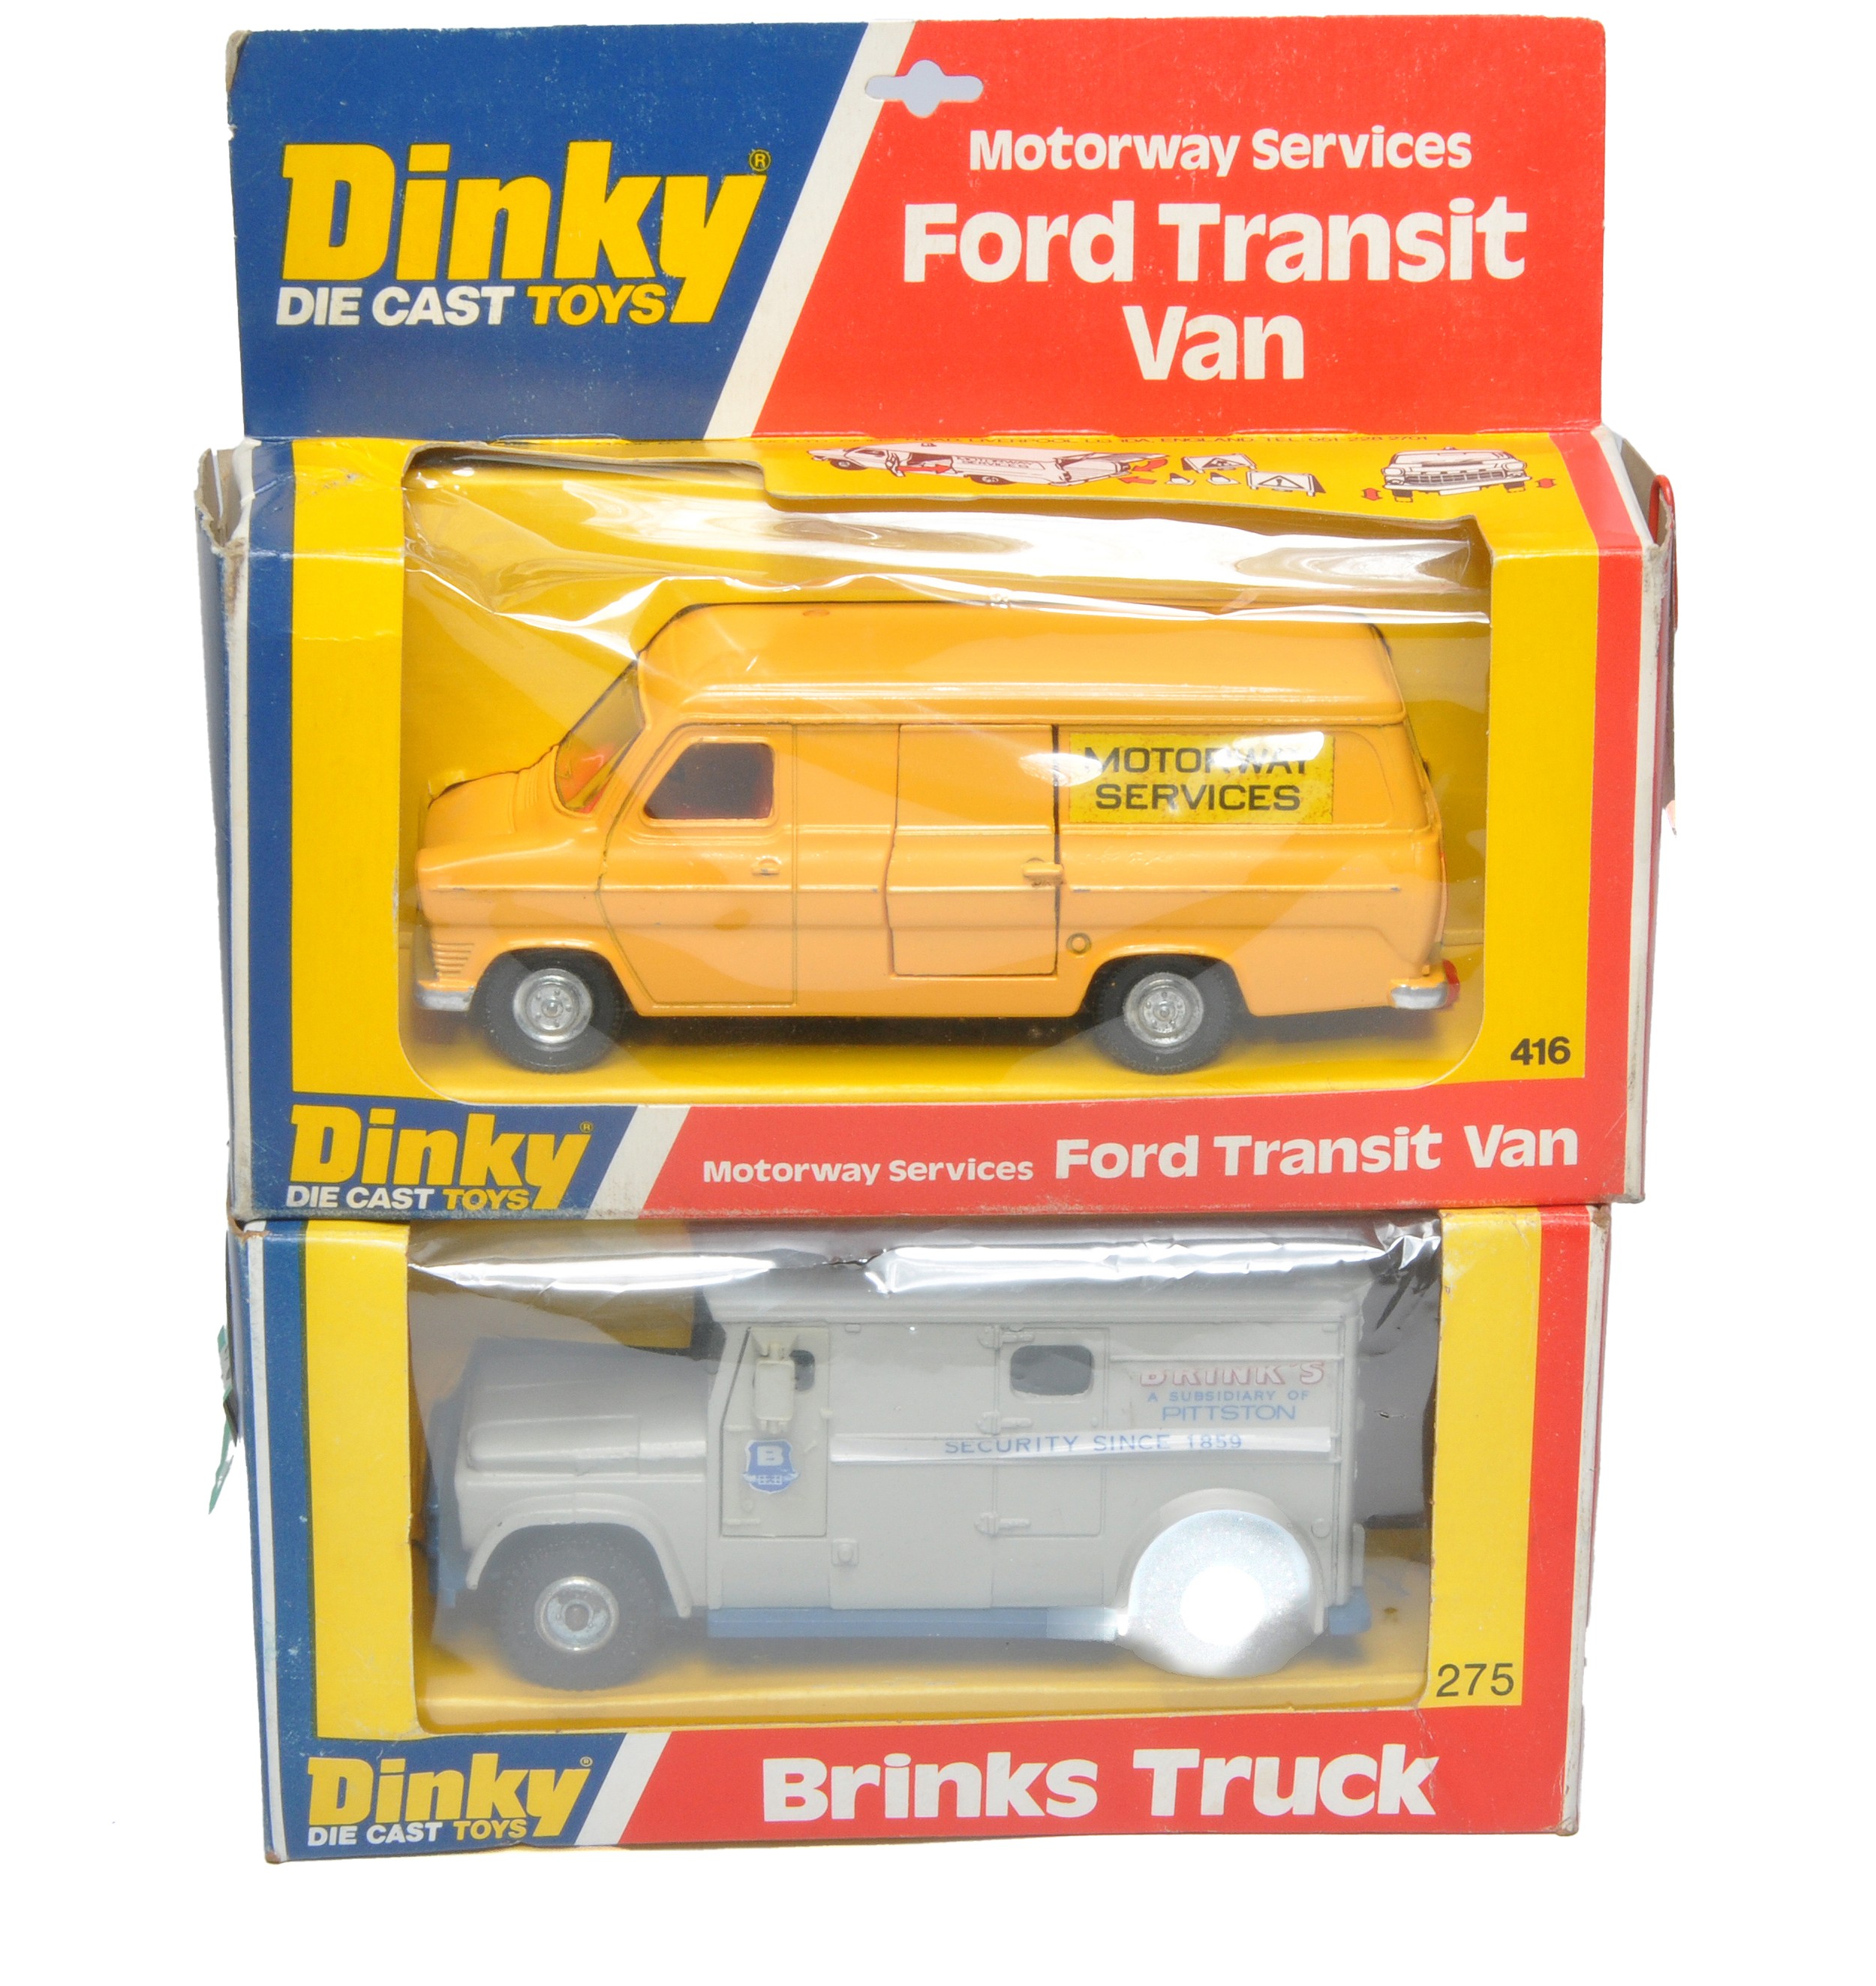 Dinky Duo of No. 416 Motorway Services Ford Transit Van and No. 275 Brinks Security Truck. Both look